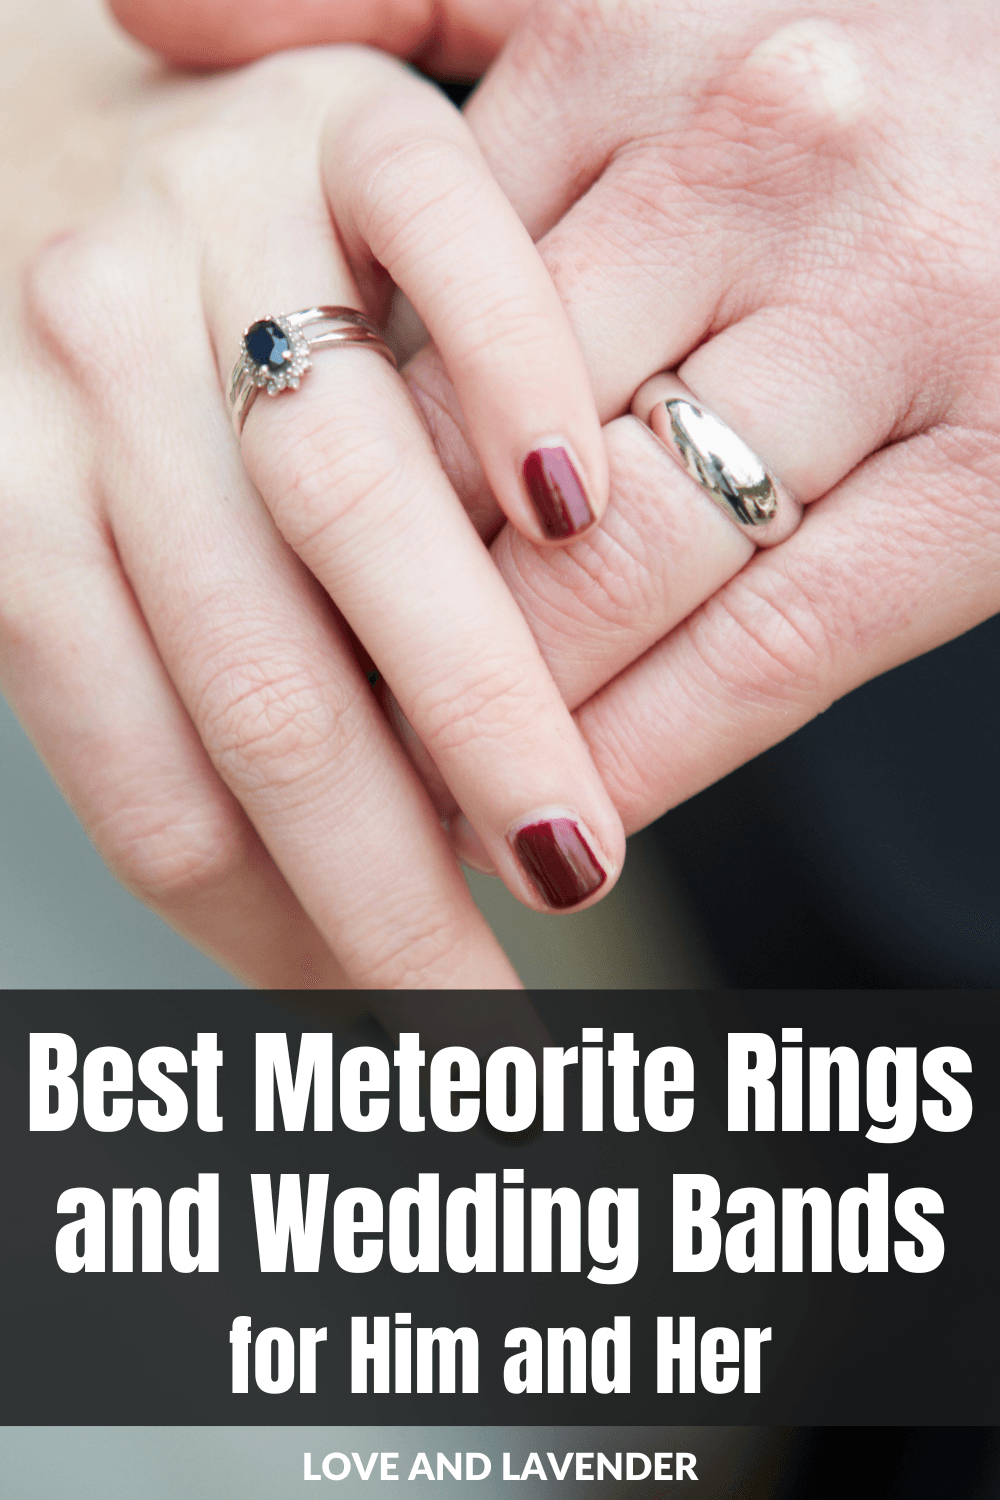 11 Meteorite Wedding Bands that are (Cue Pun) Out of this World